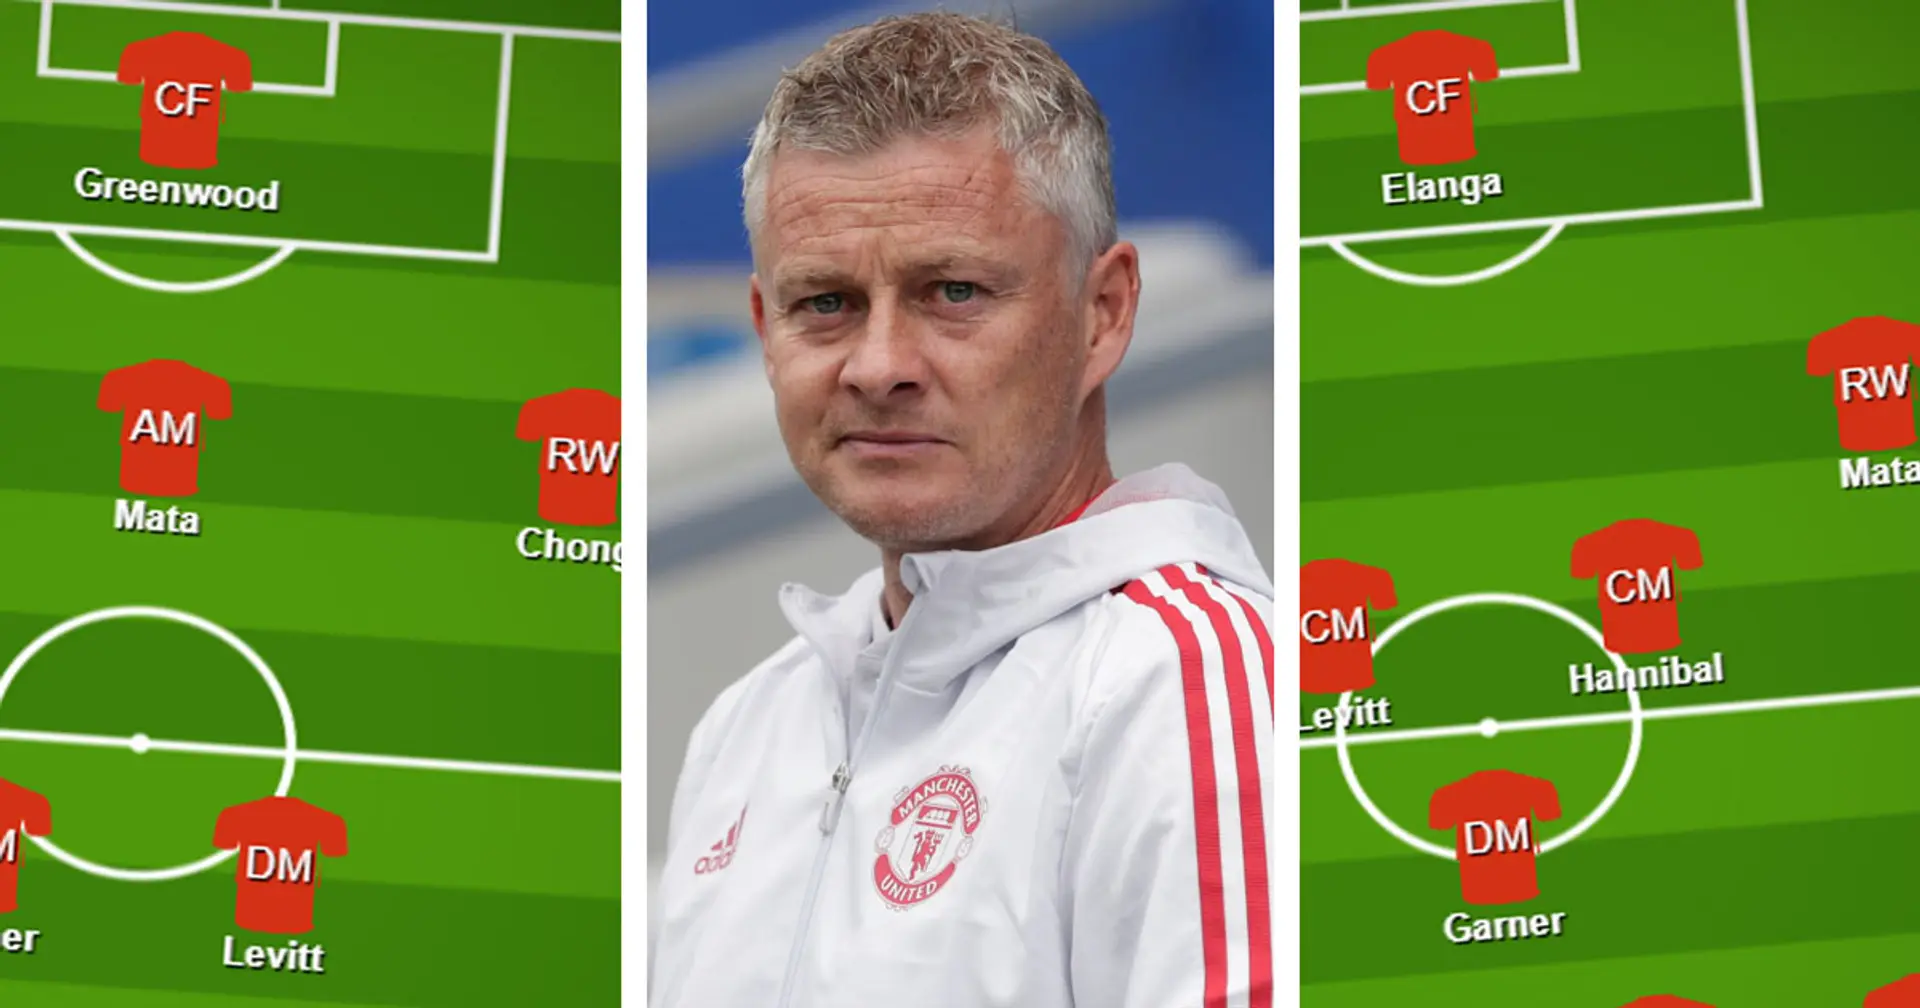 Solskjaer's latest formations revealed: How United have been set-up in pre-season games so far